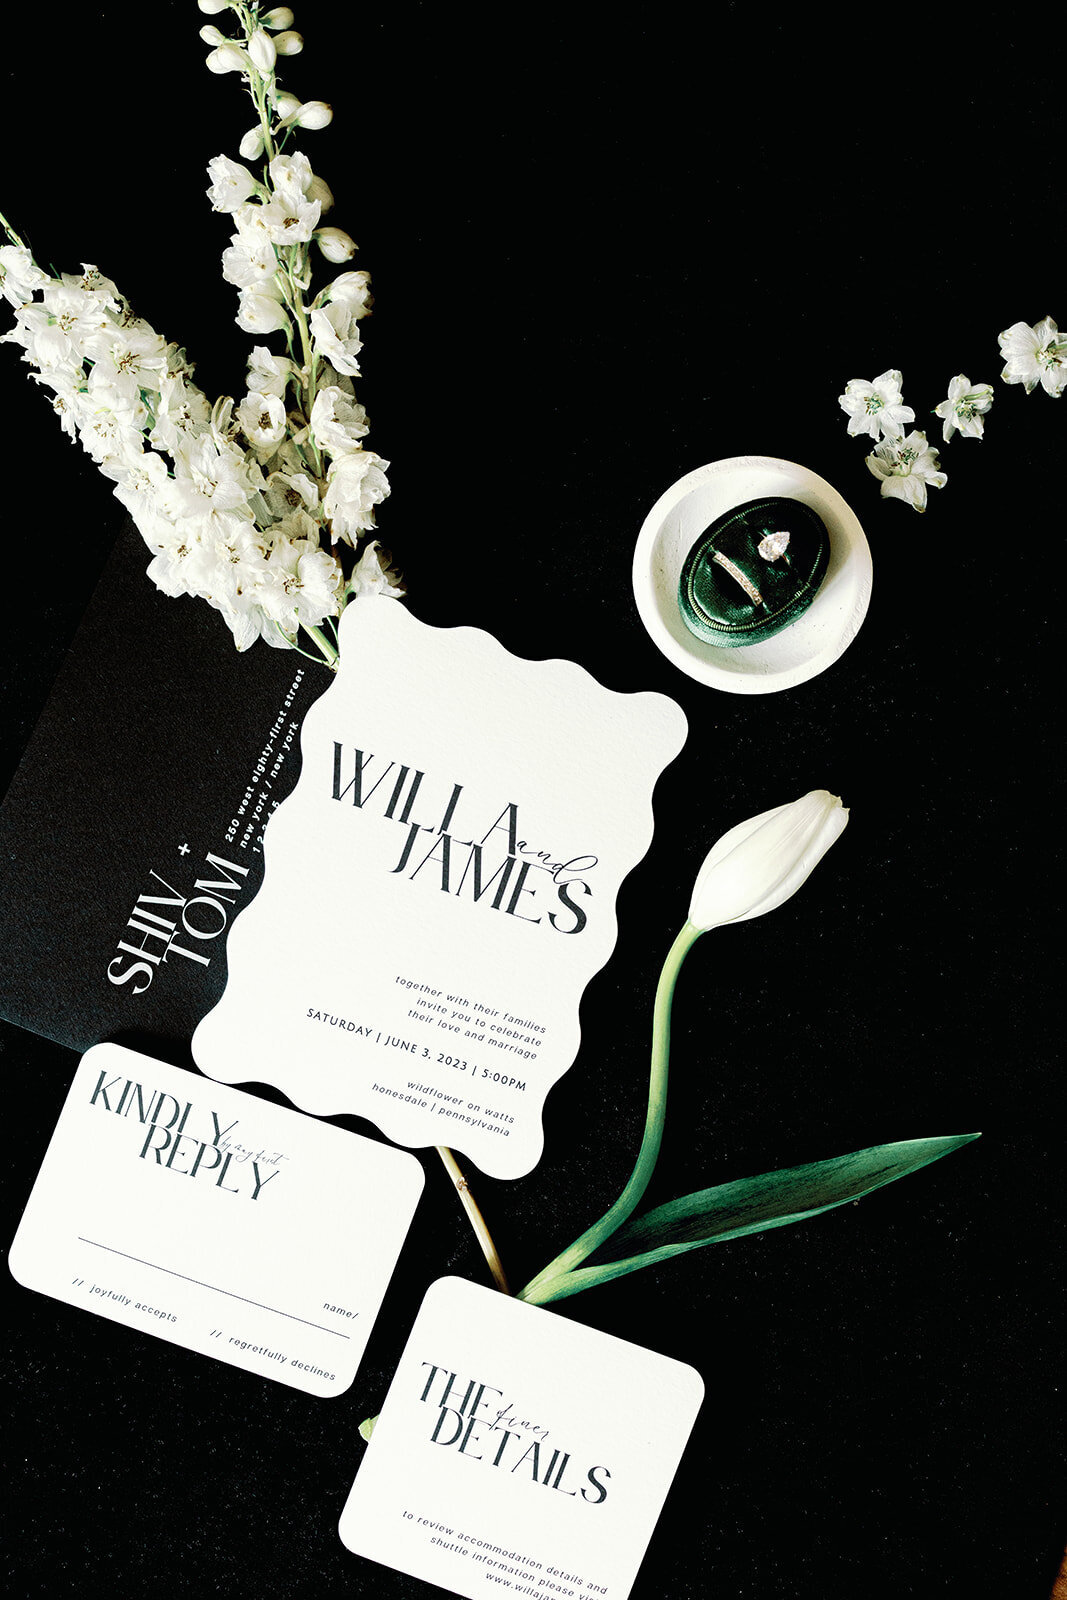 Scalloped wedding stationery and wedding rings on a black background